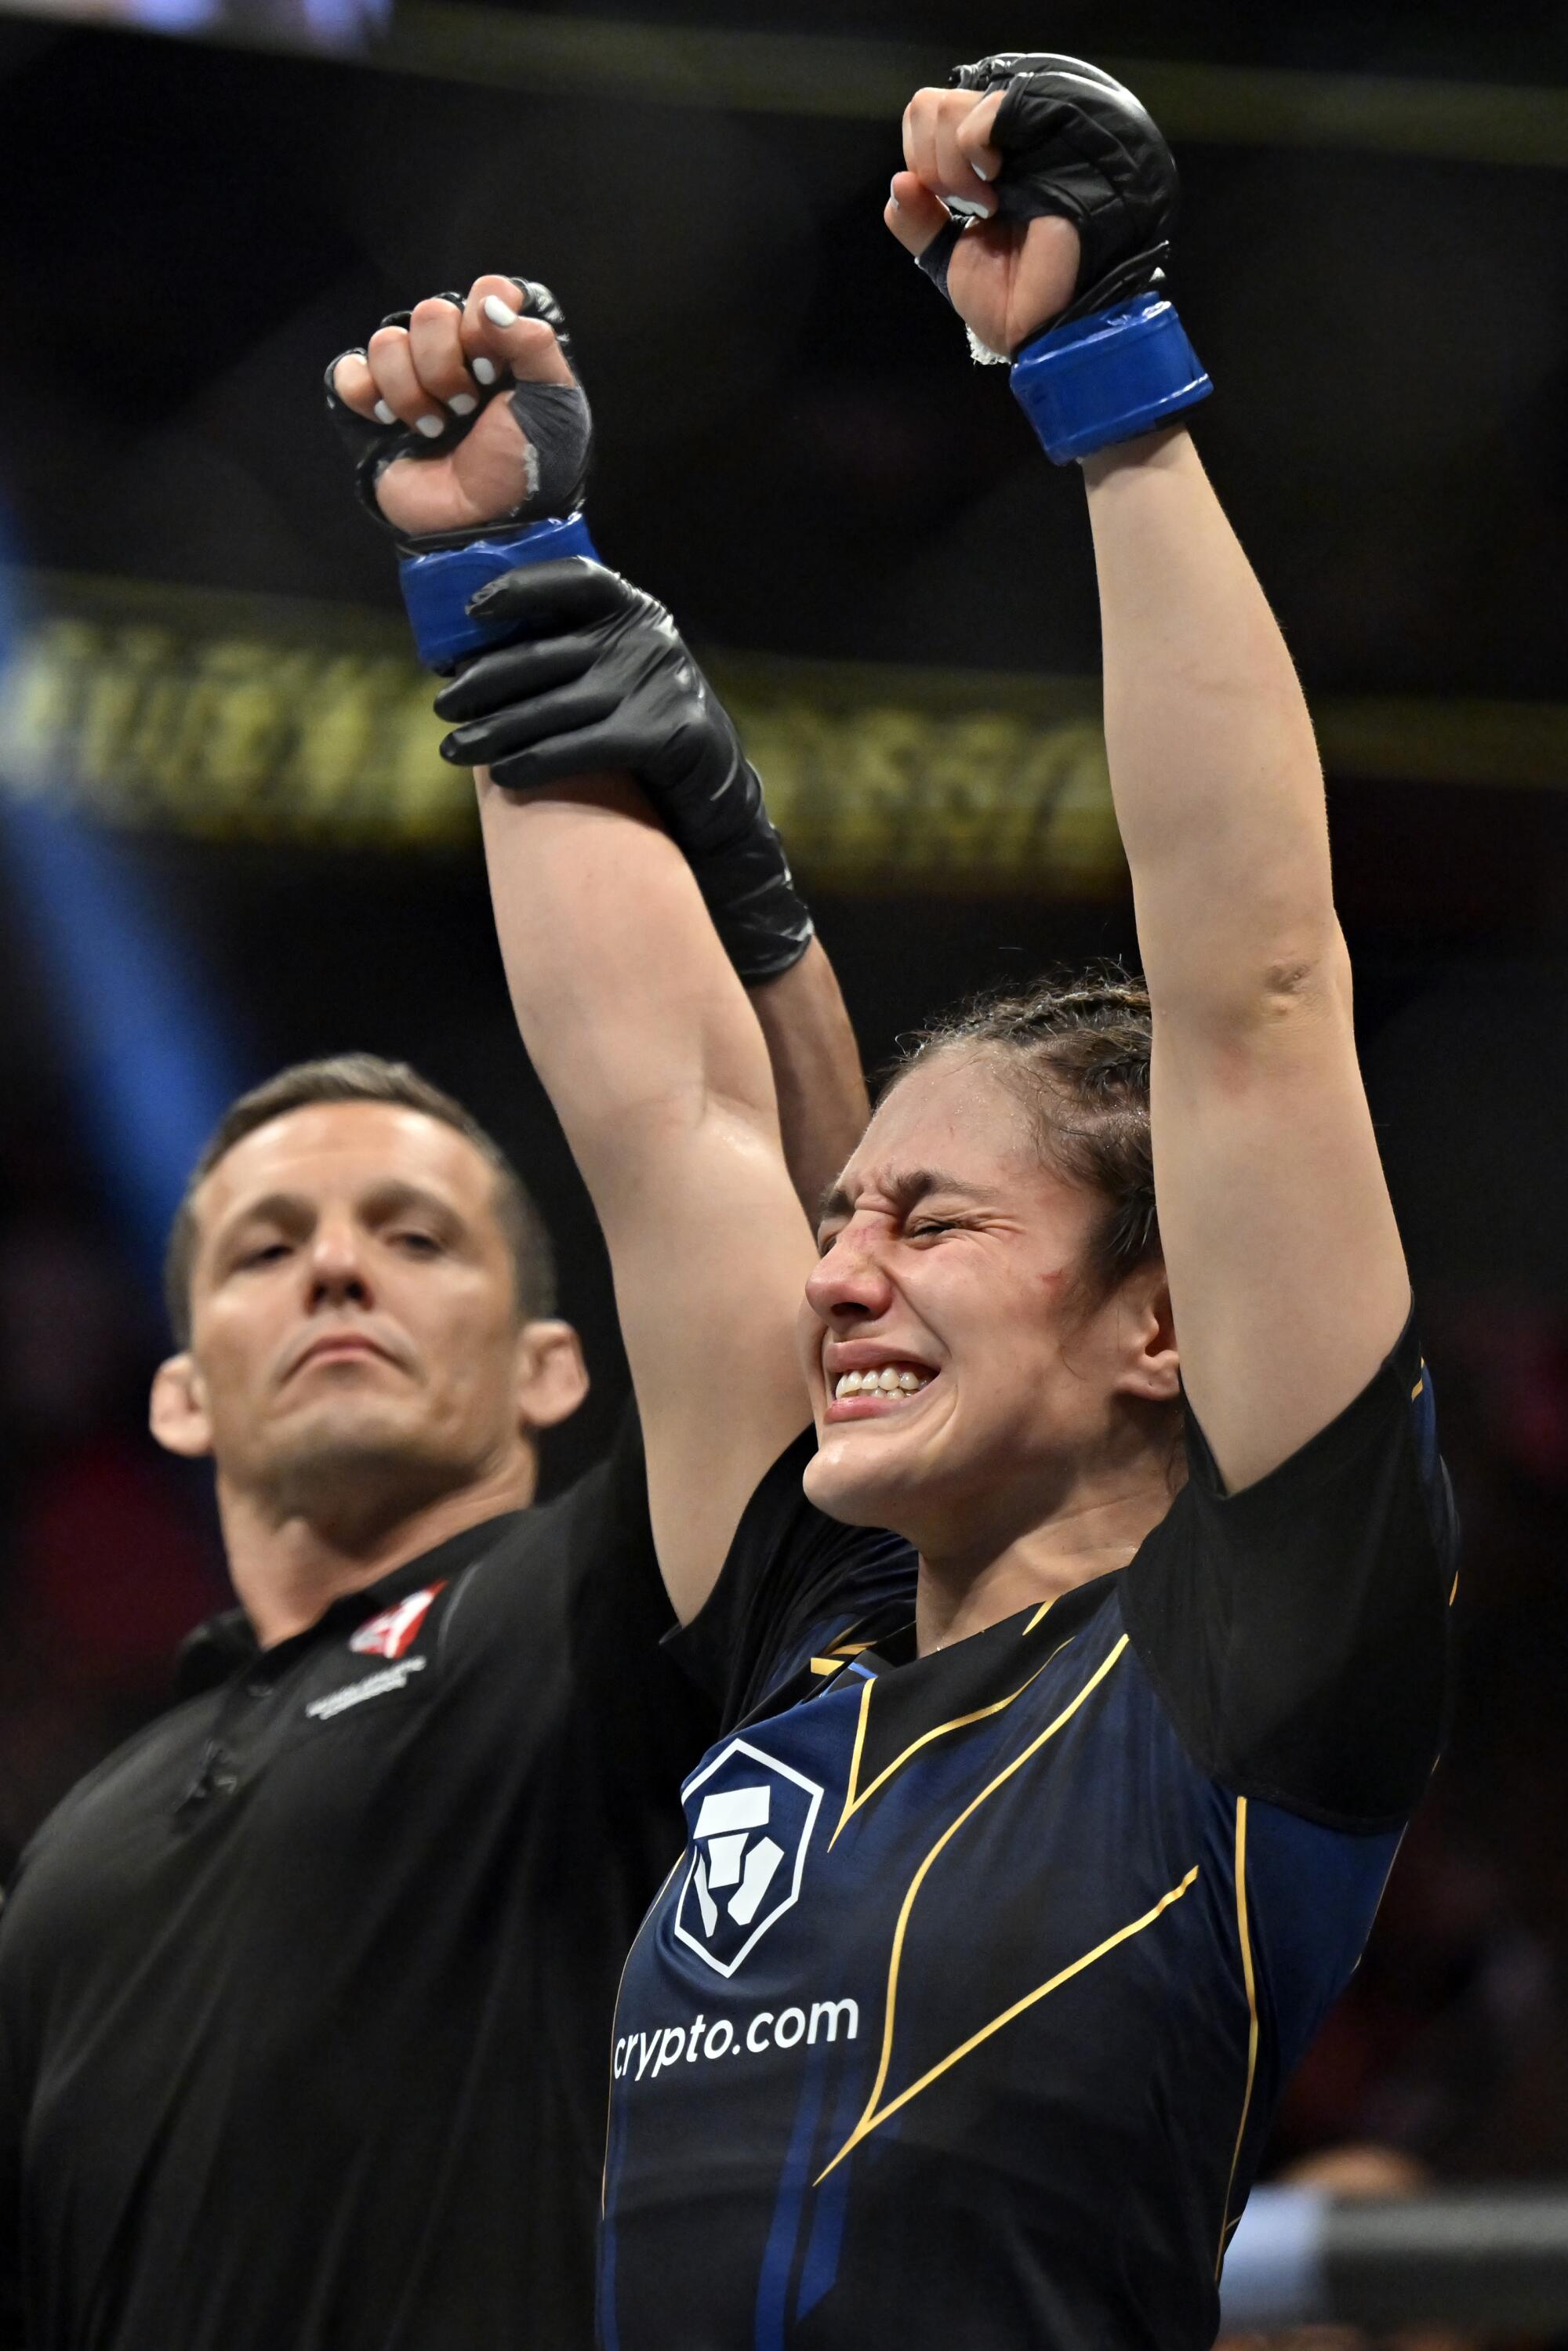 Alexa Grasso raises her arms after defeat 